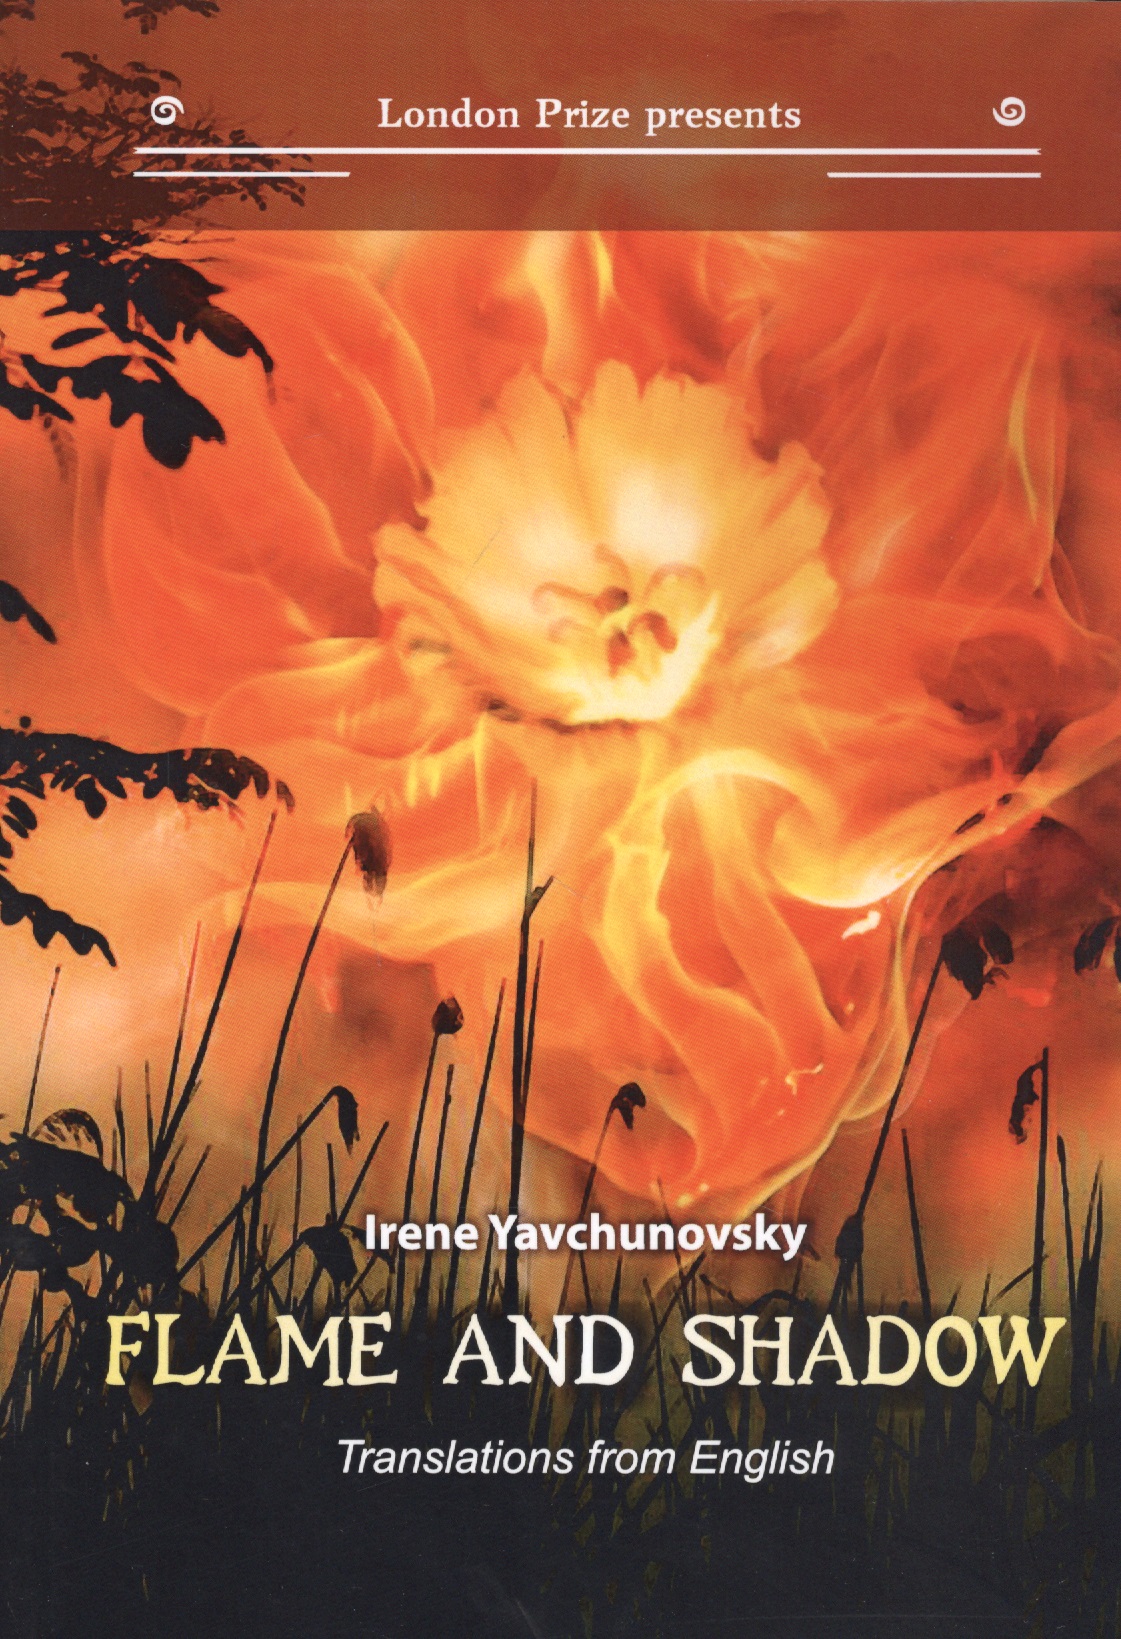 Flame and shadow